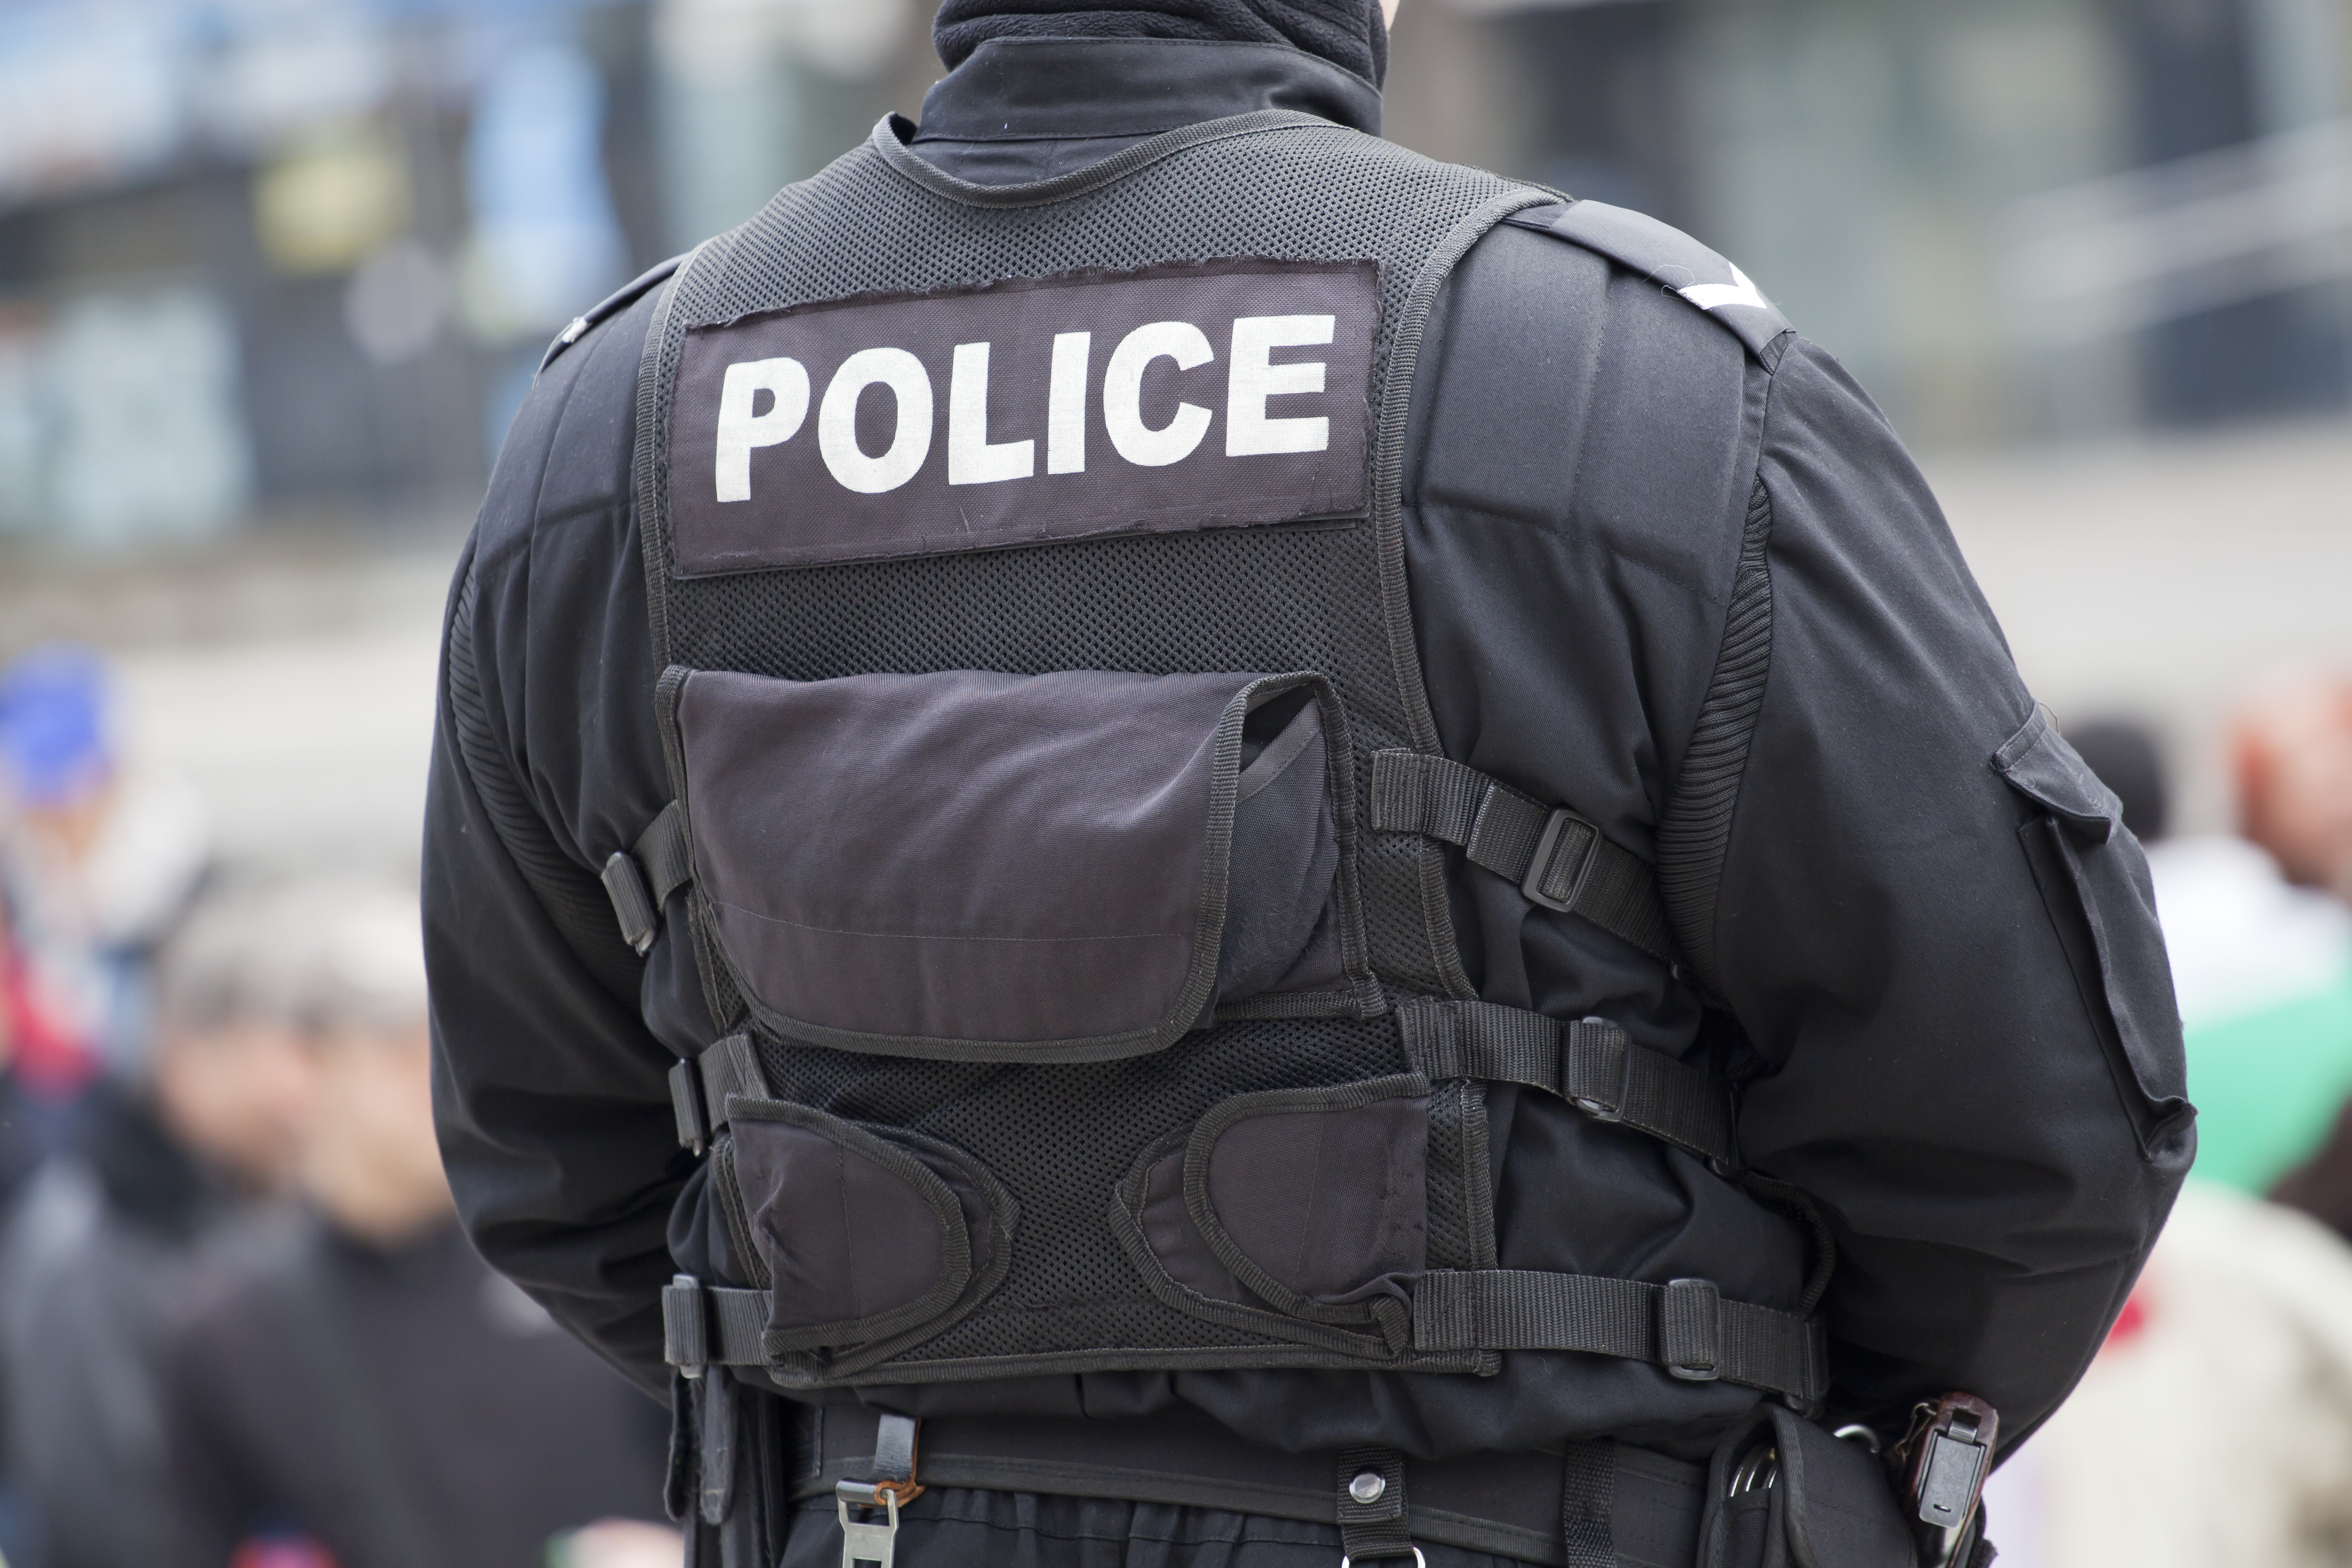 Detail of a police officer | Source: Shutterstock